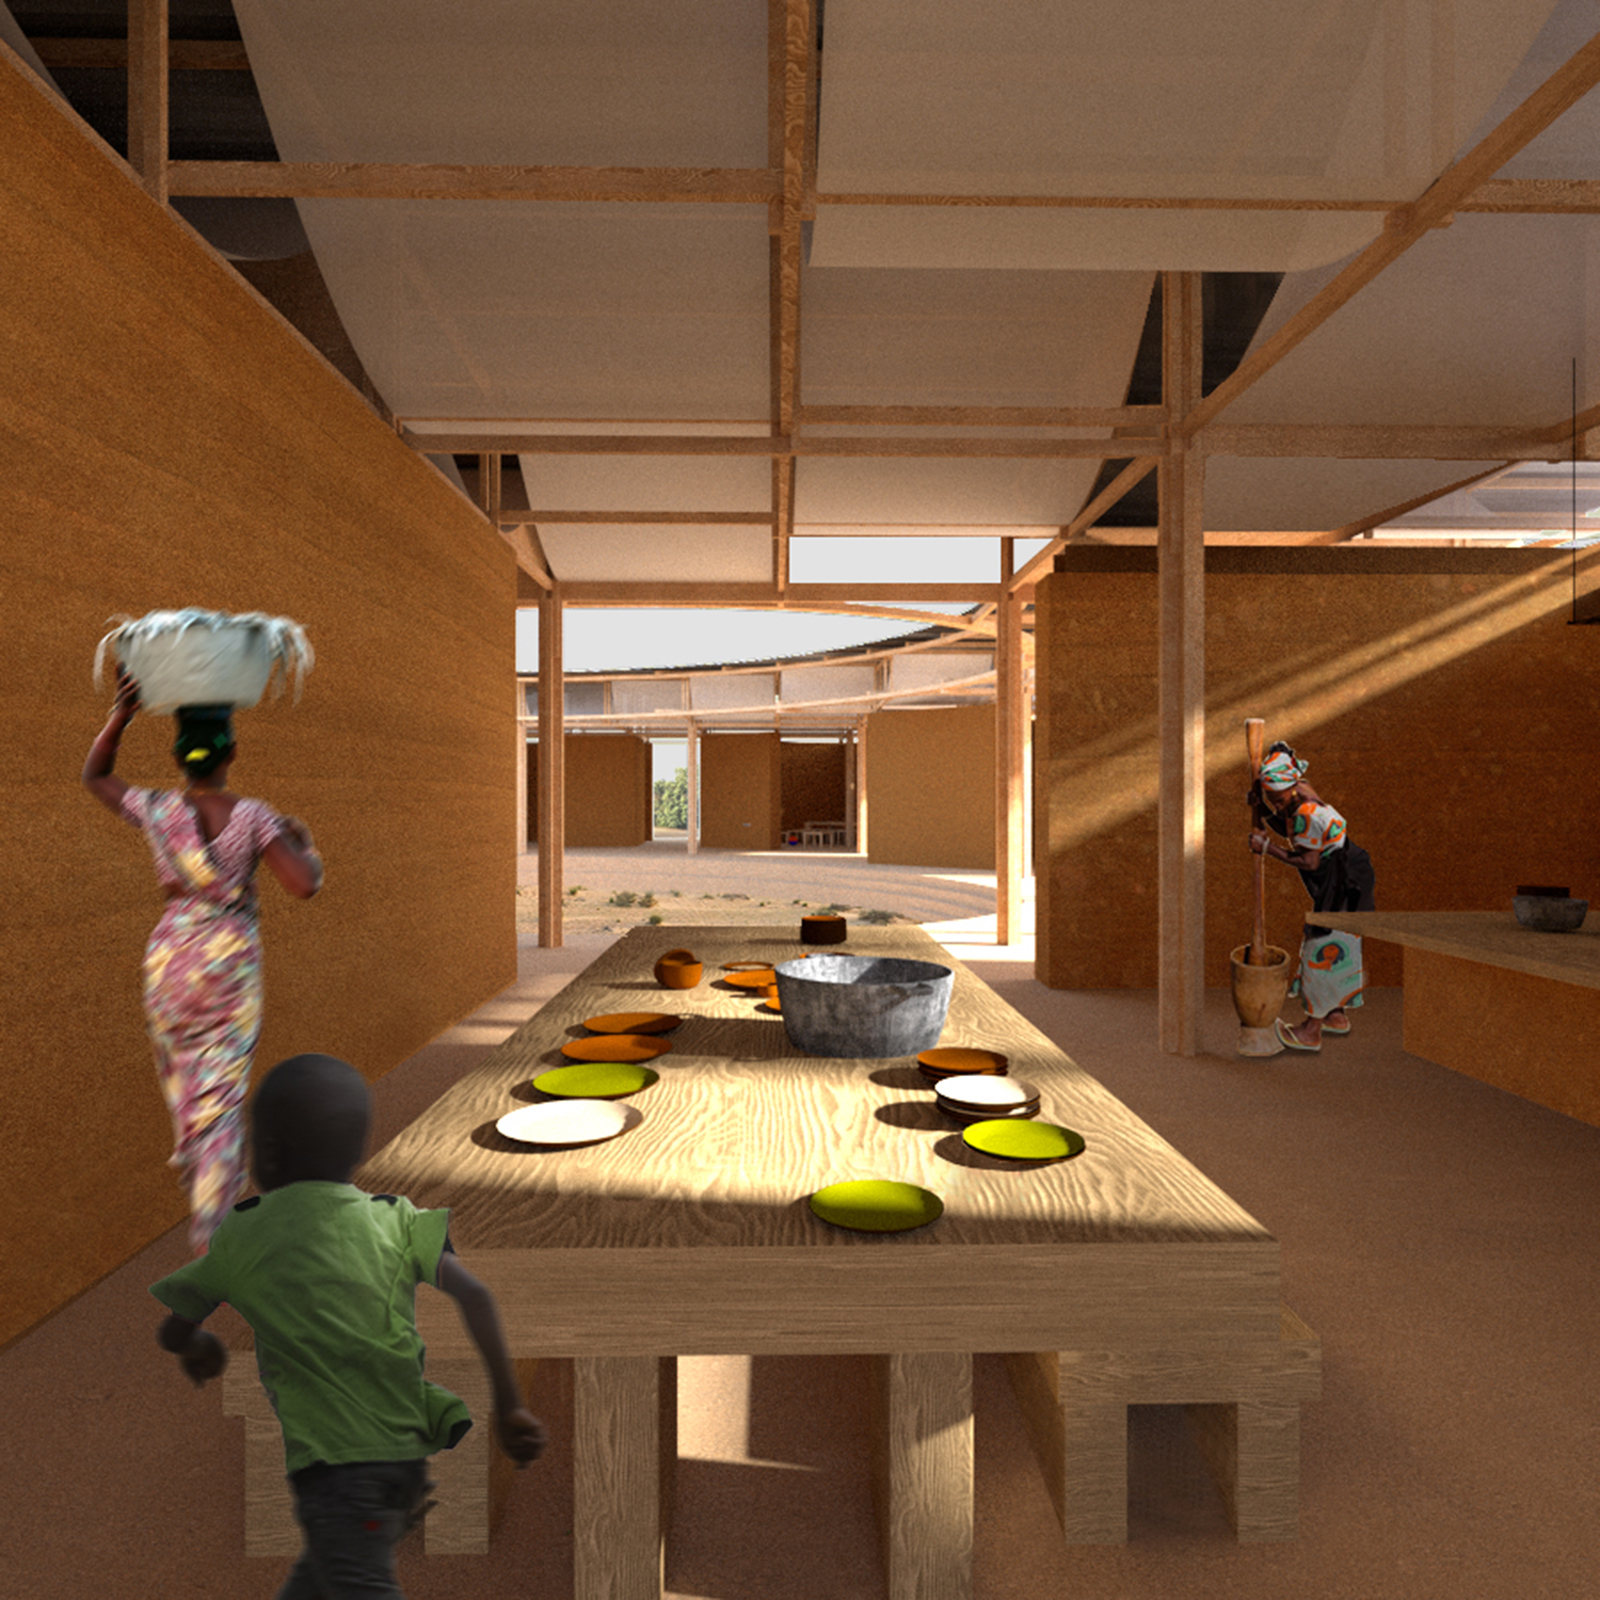 Archisearch 'Hide and seek': entry by Georgios Thalassinos & Ioanna Karampetsou at the Kaira Looro Architecture Competition 2022, Children’s House